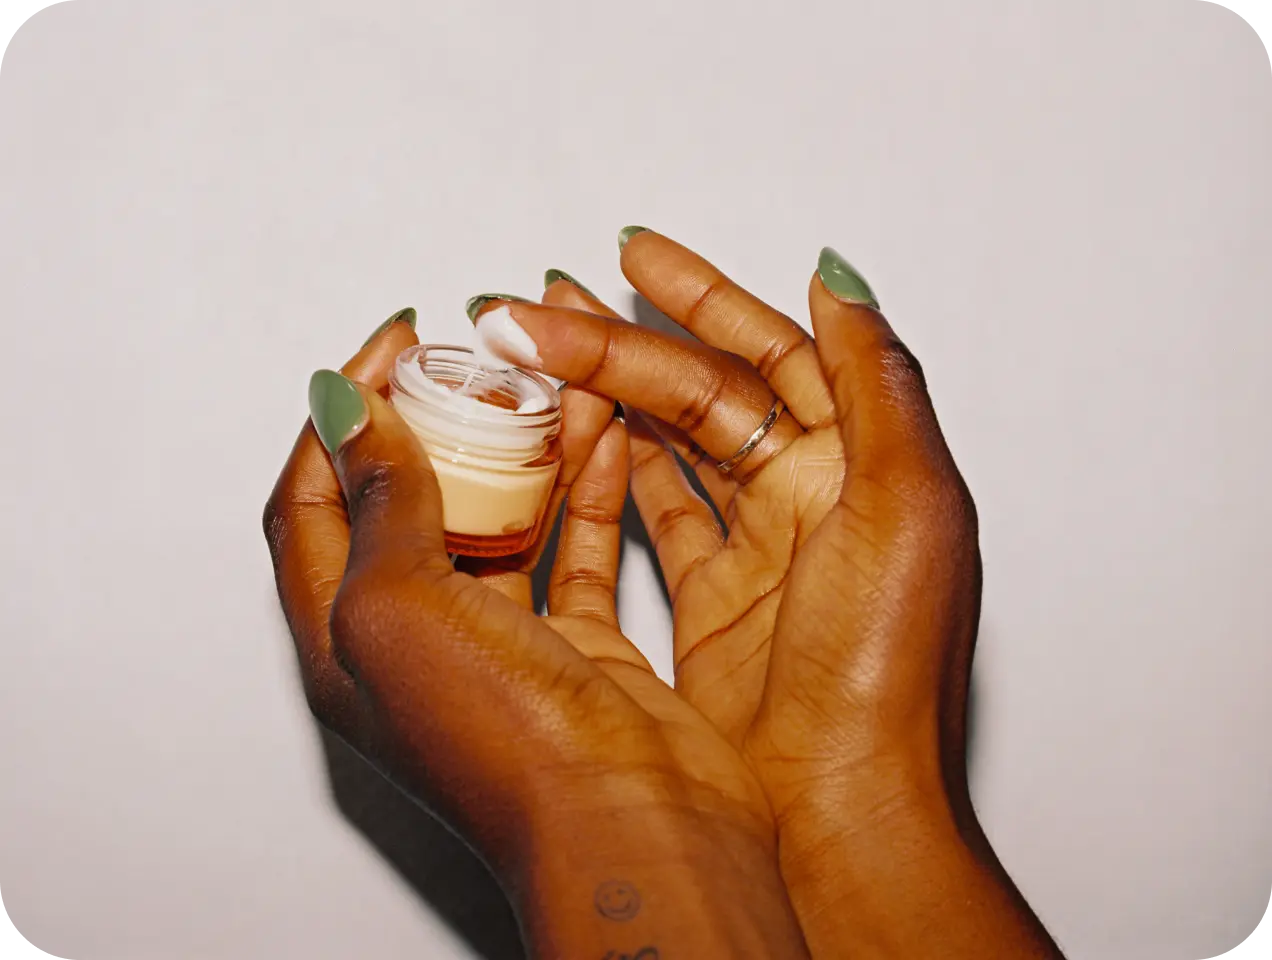 Black hands testing out a cream